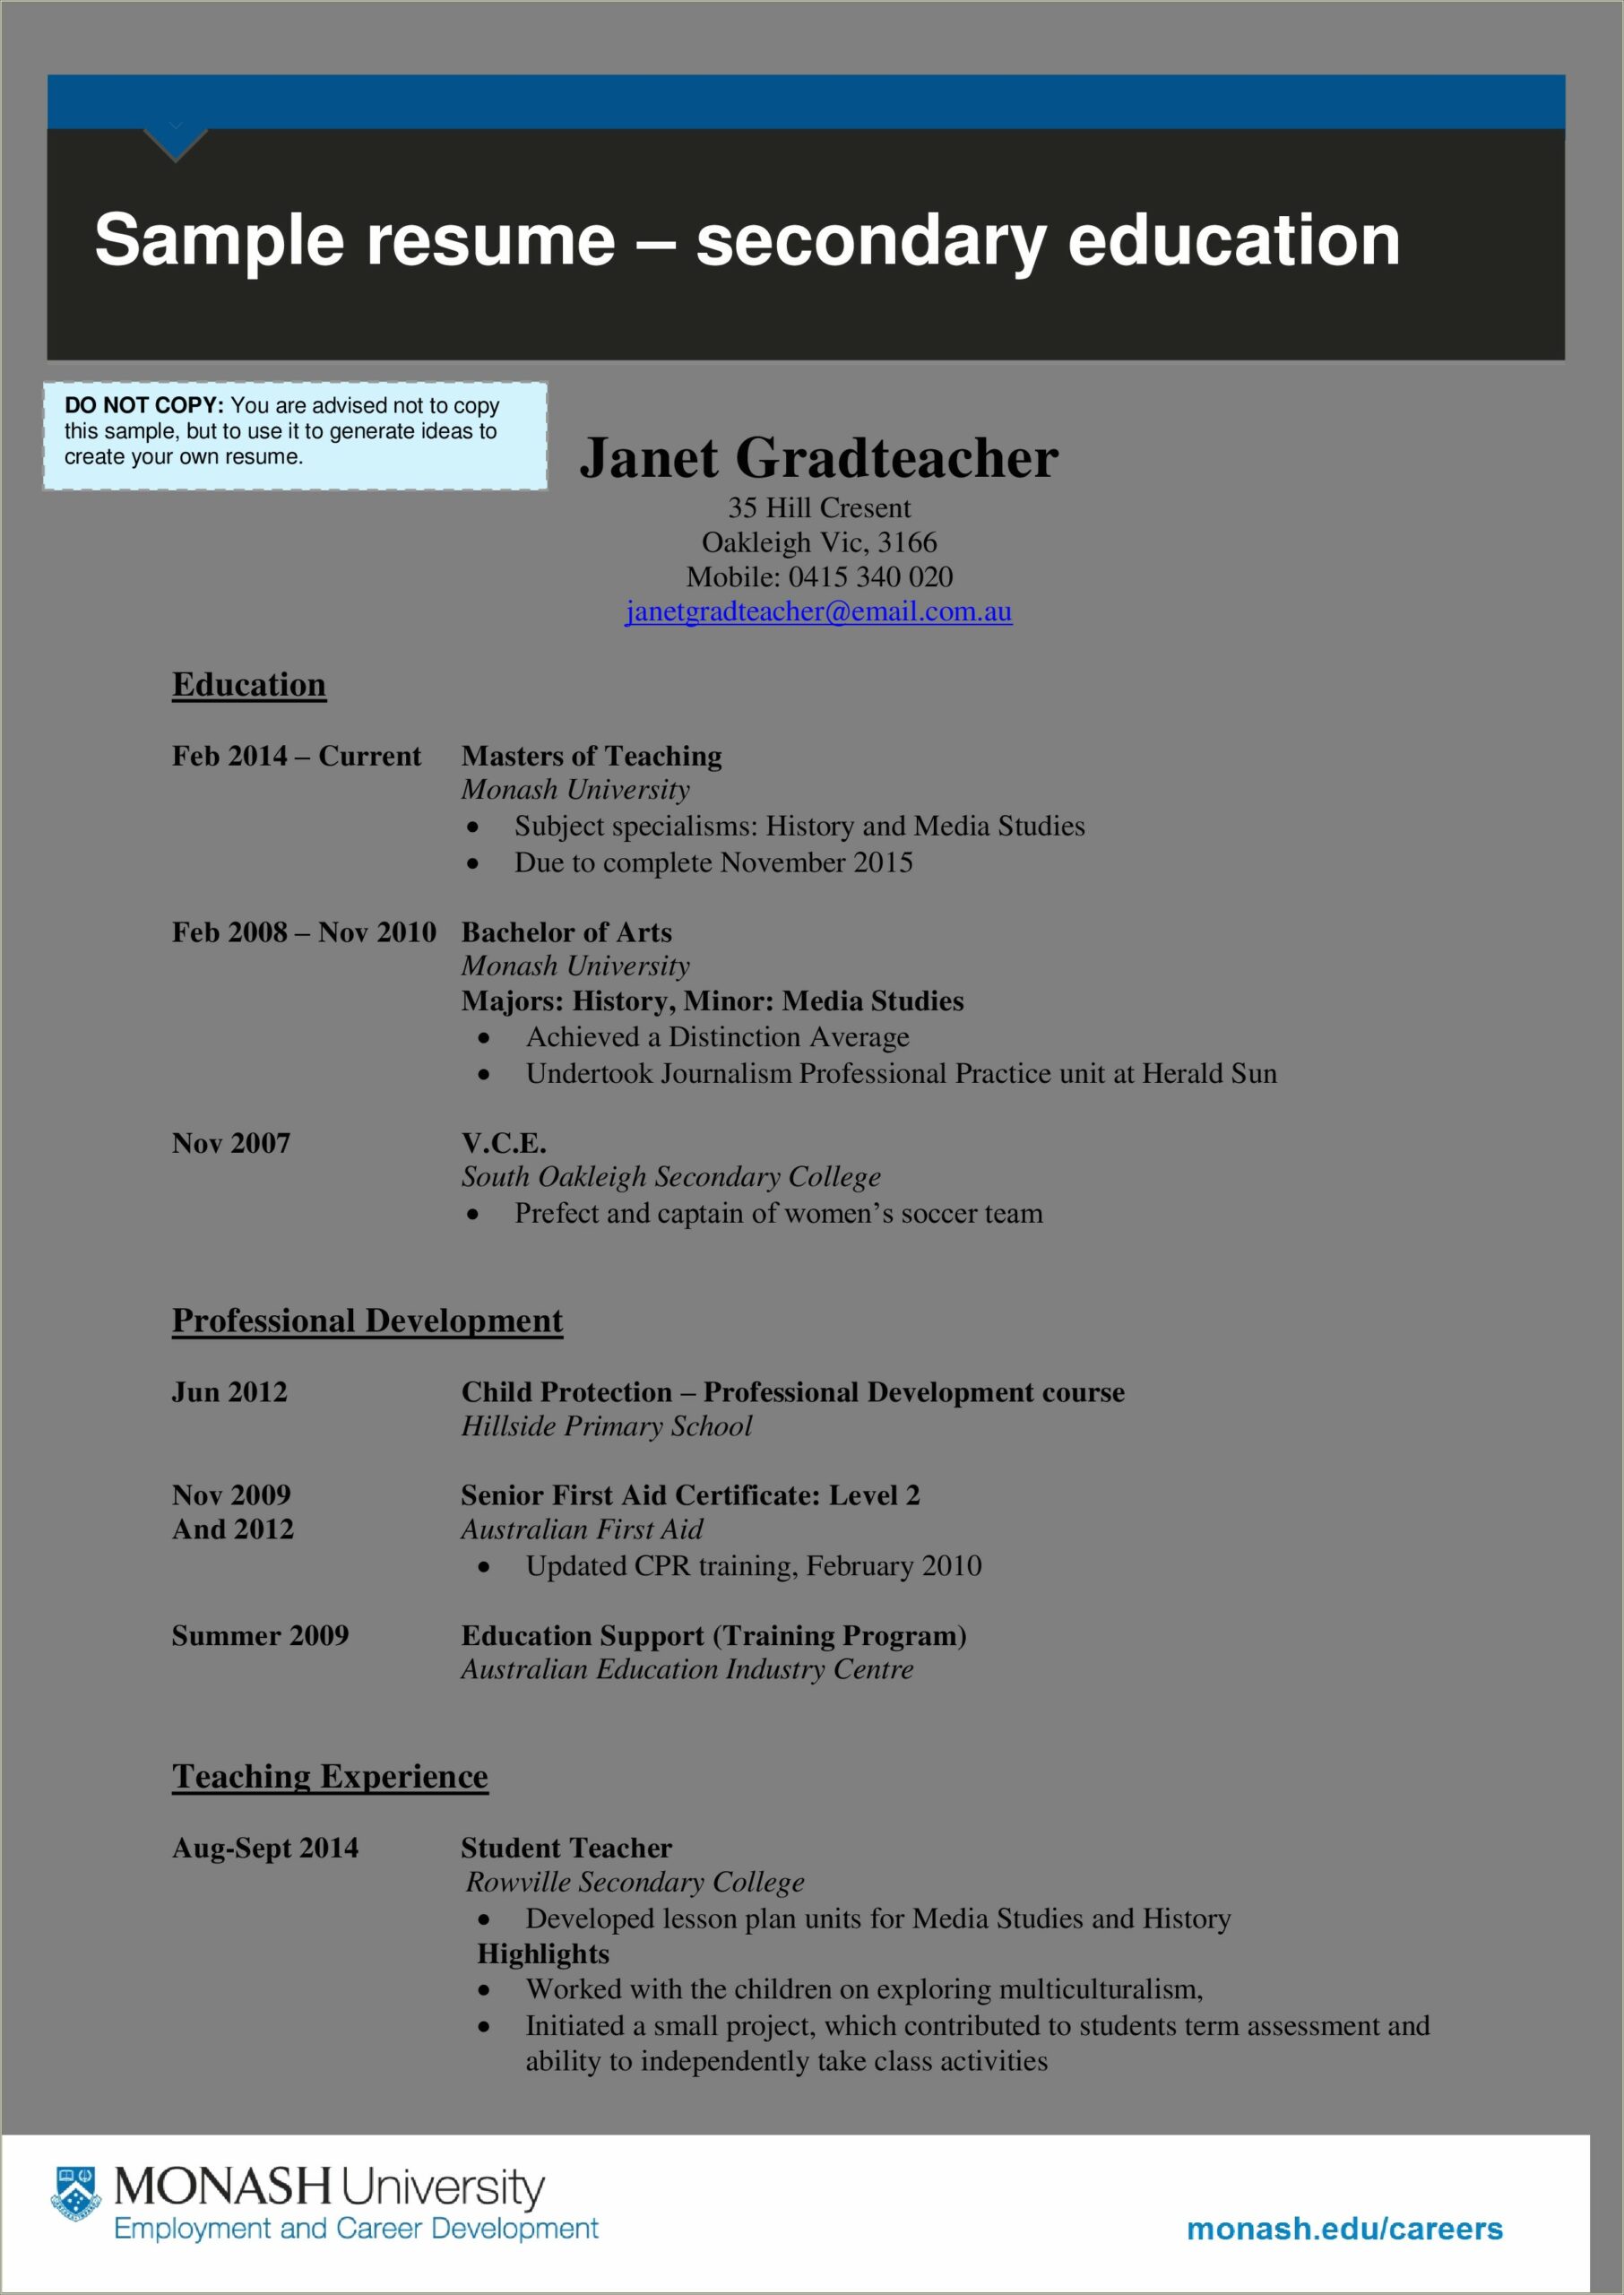 Sample Resume For High School Teacher With Experience